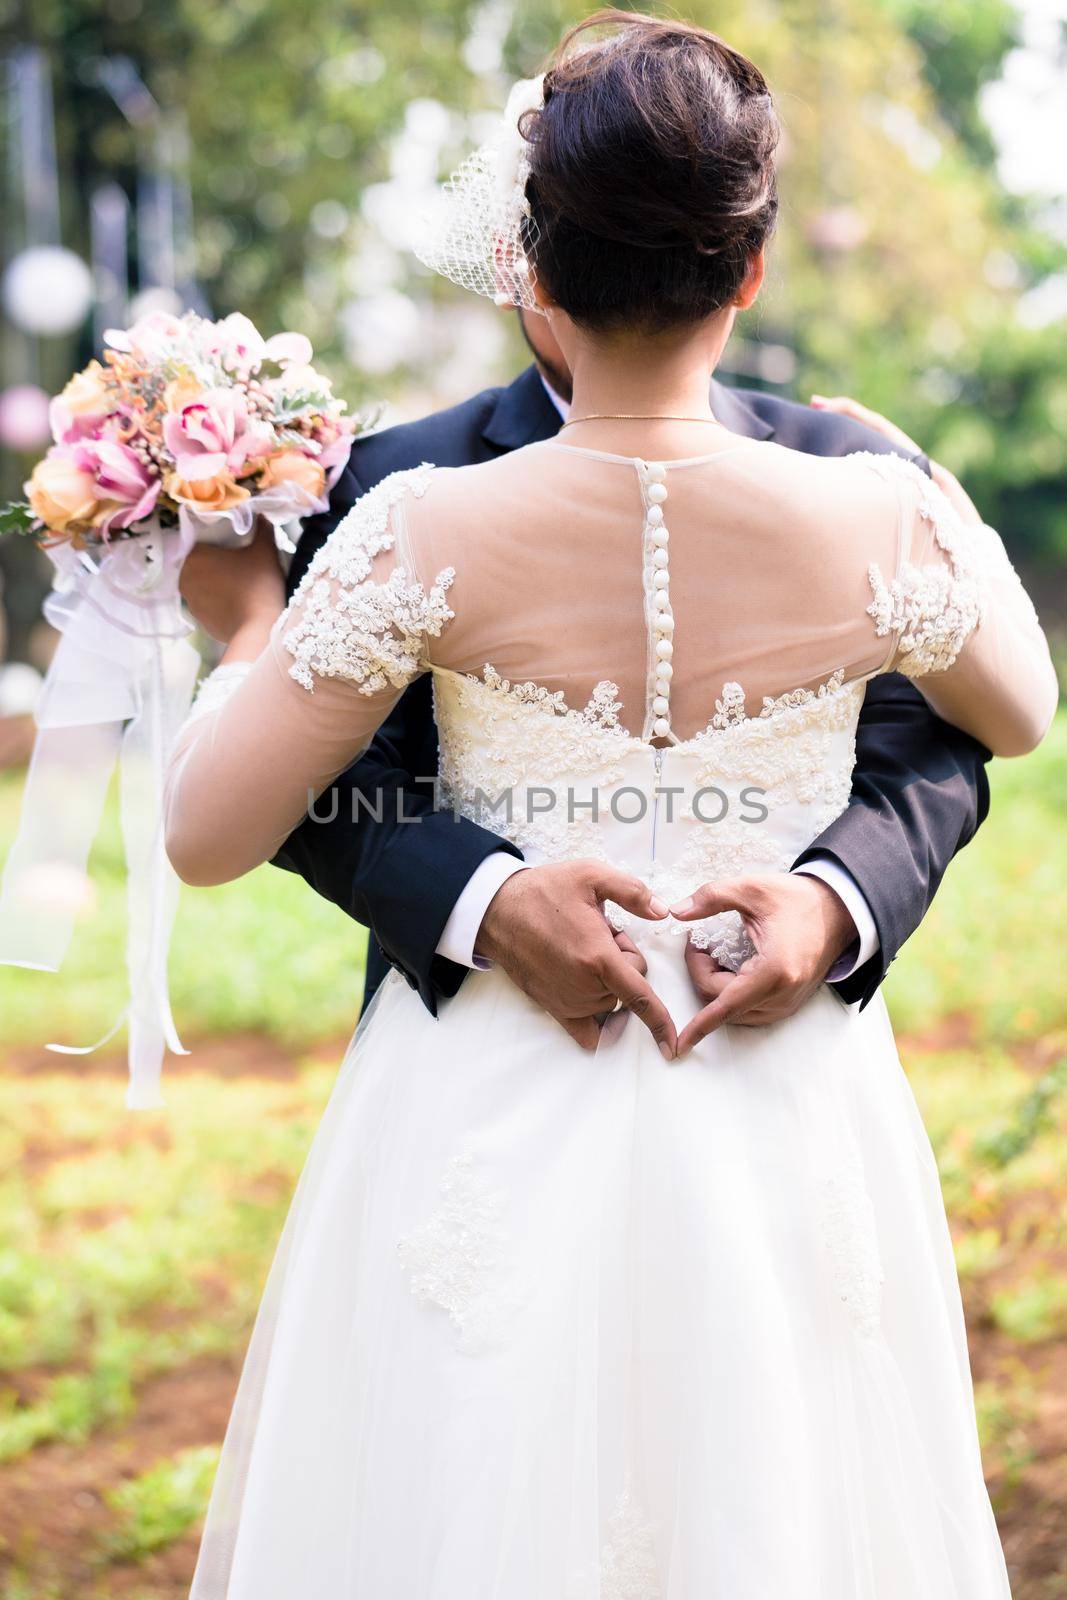 Bride and Bridegroom hugging each other at wedding by Kzenon